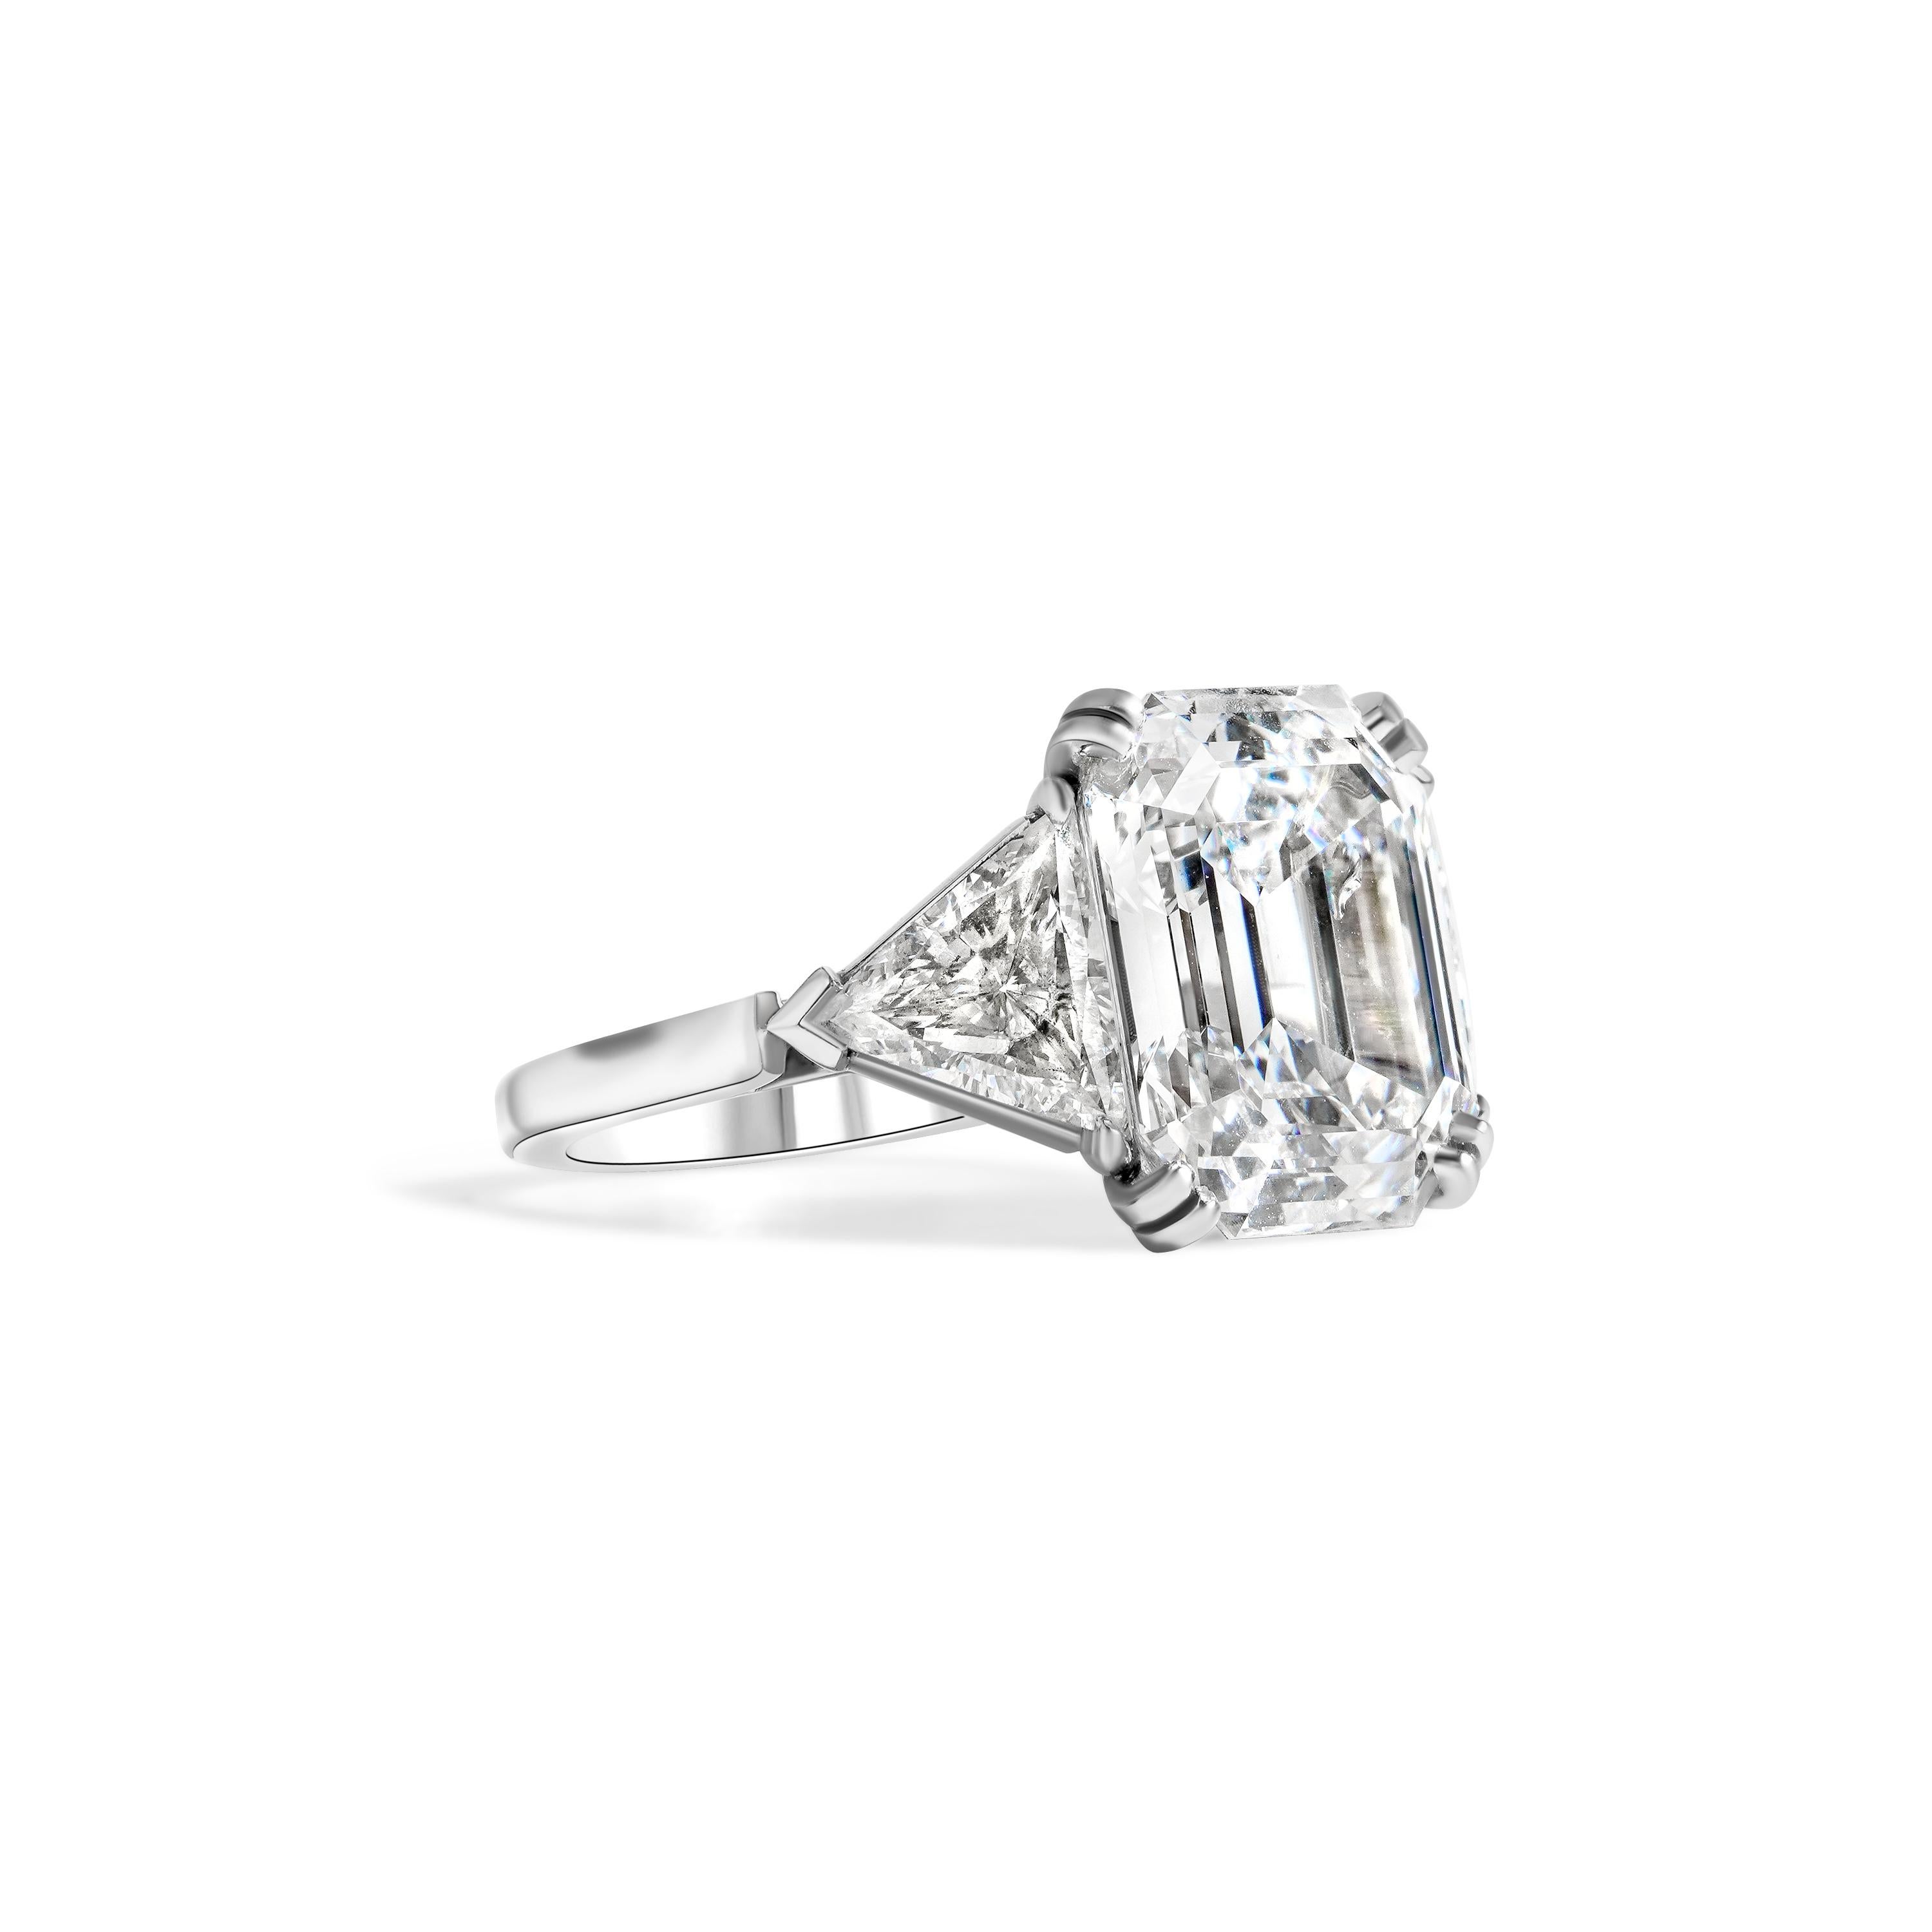 Contemporary GIA Certified 10 Carat Emerald Cut Diamond Ring For Sale